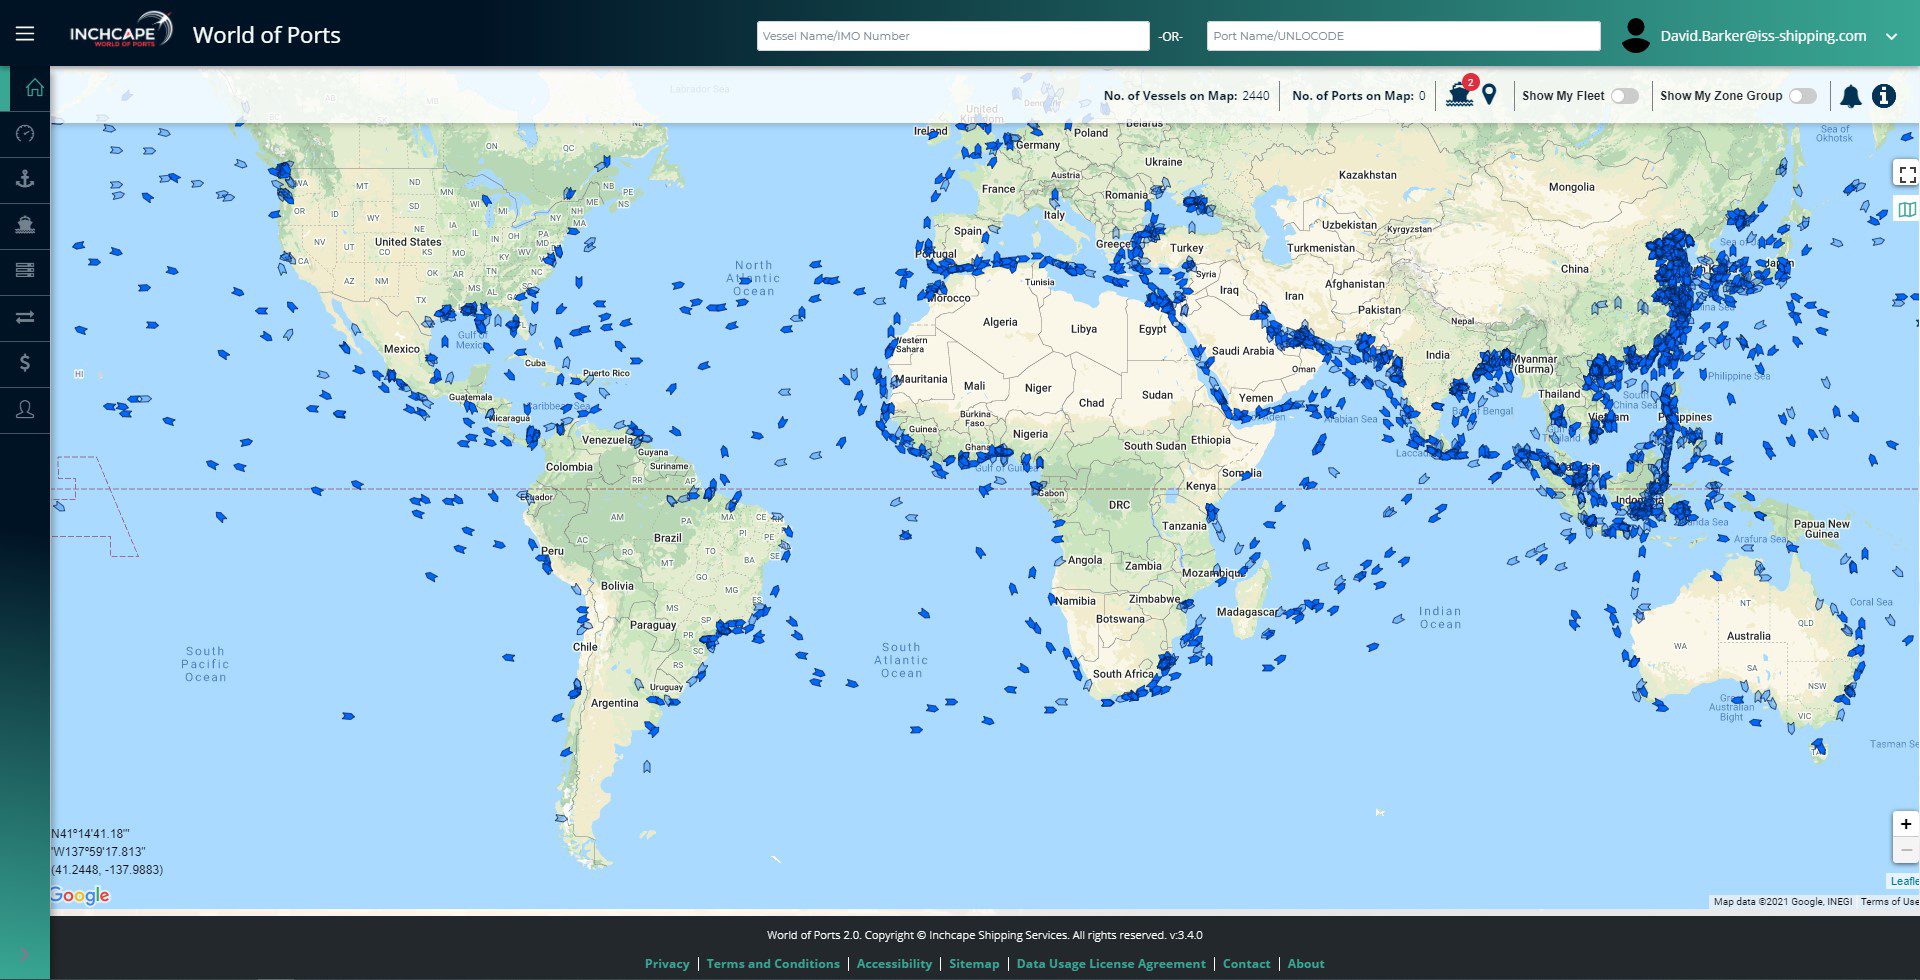 Inchcape’s new Port Cost Estimator is missing link in voyage cost puzzle